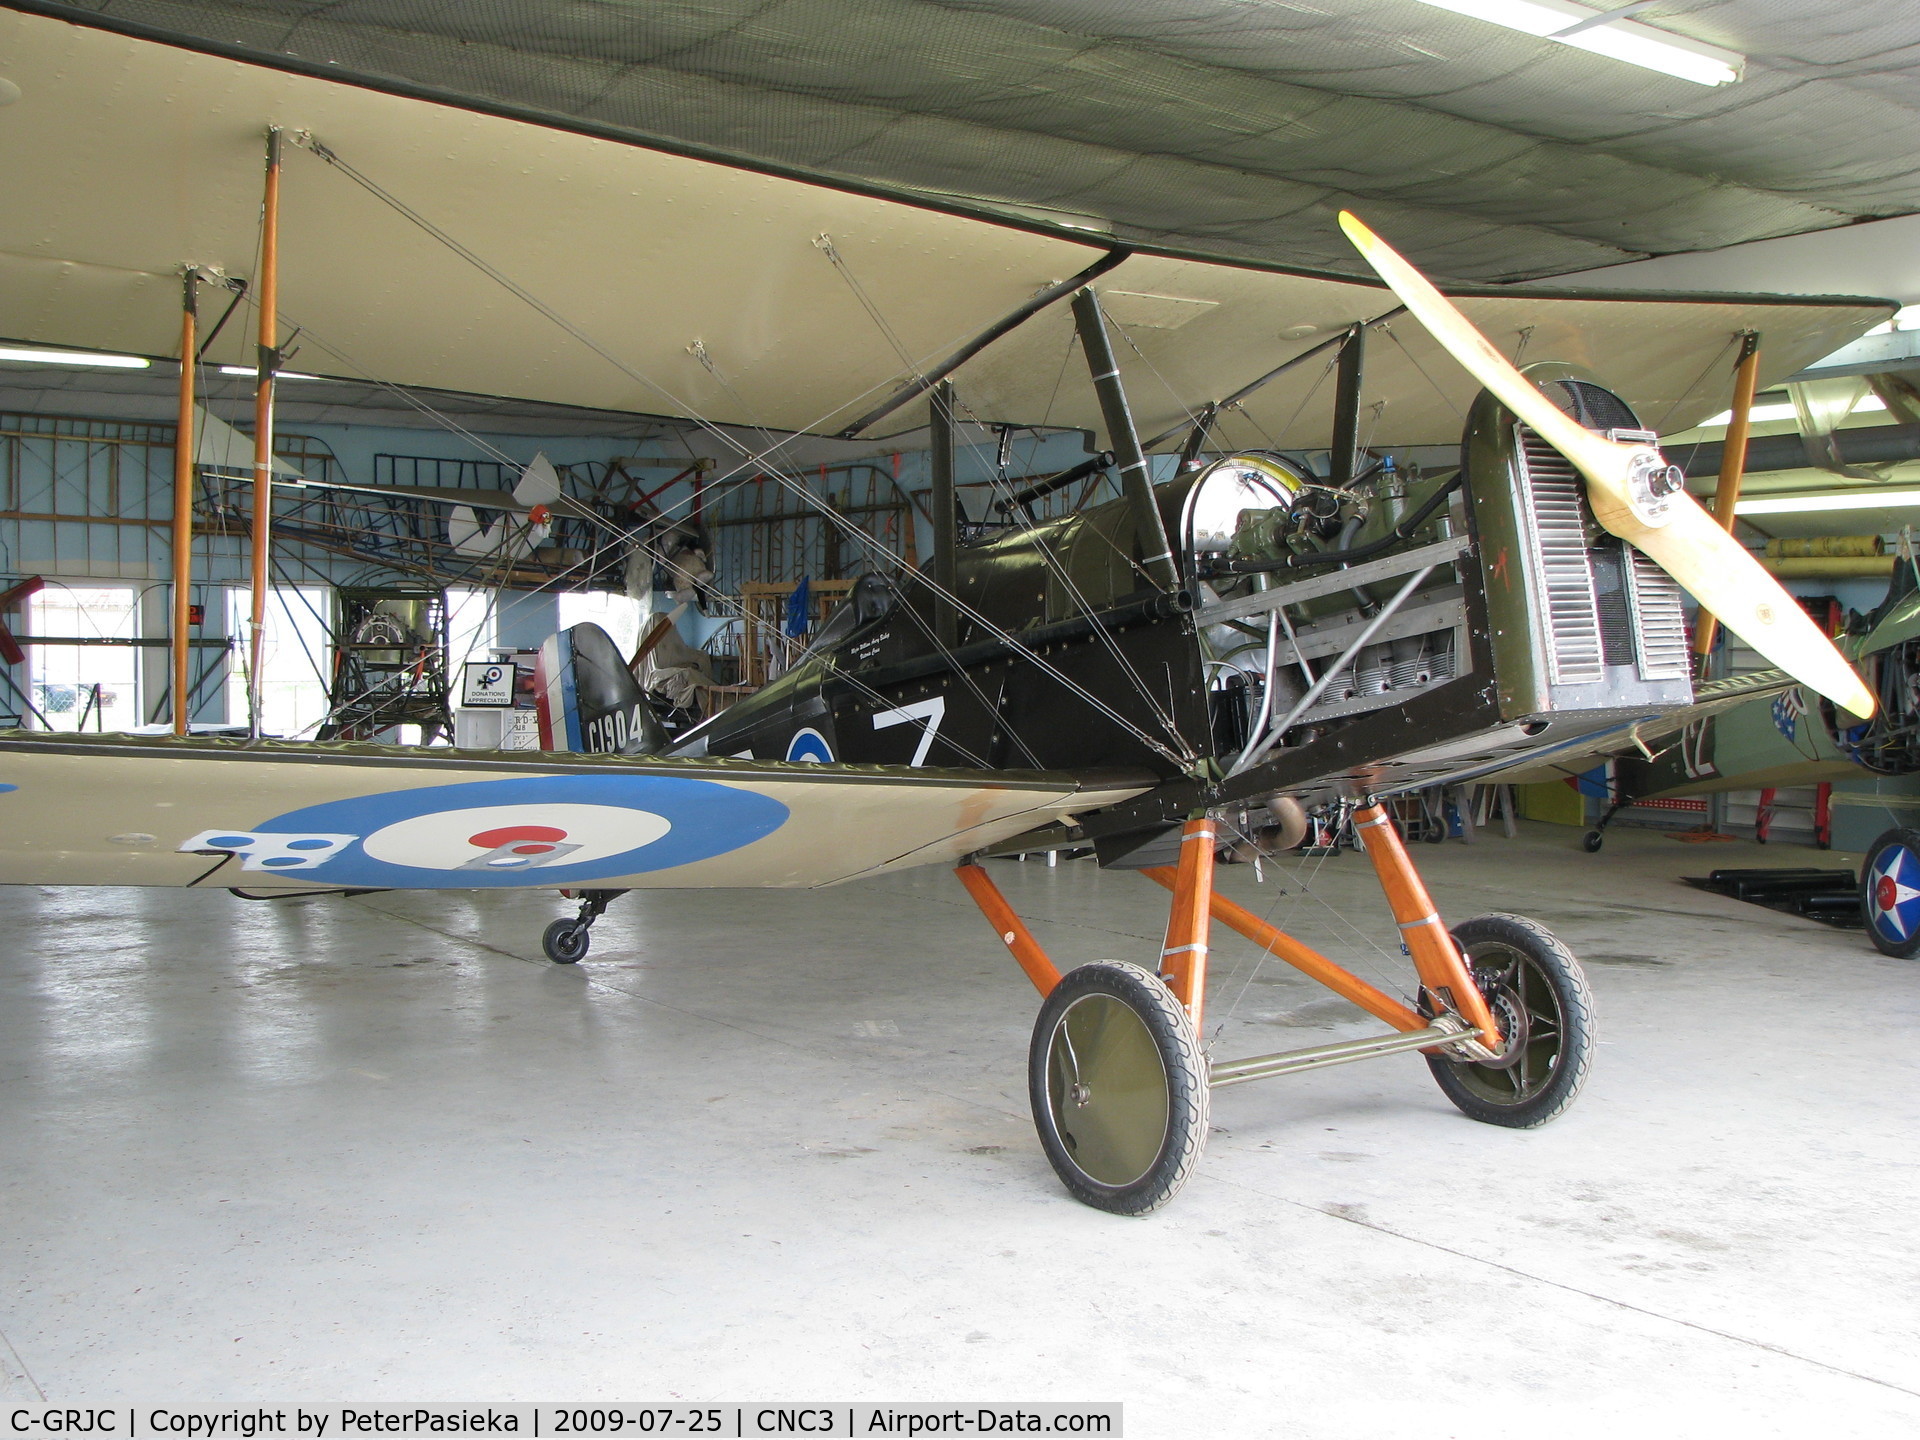 C-GRJC, 1991 Royal Aircraft Factory SE-5A Replica C/N C1904, The Great War Flying Museum